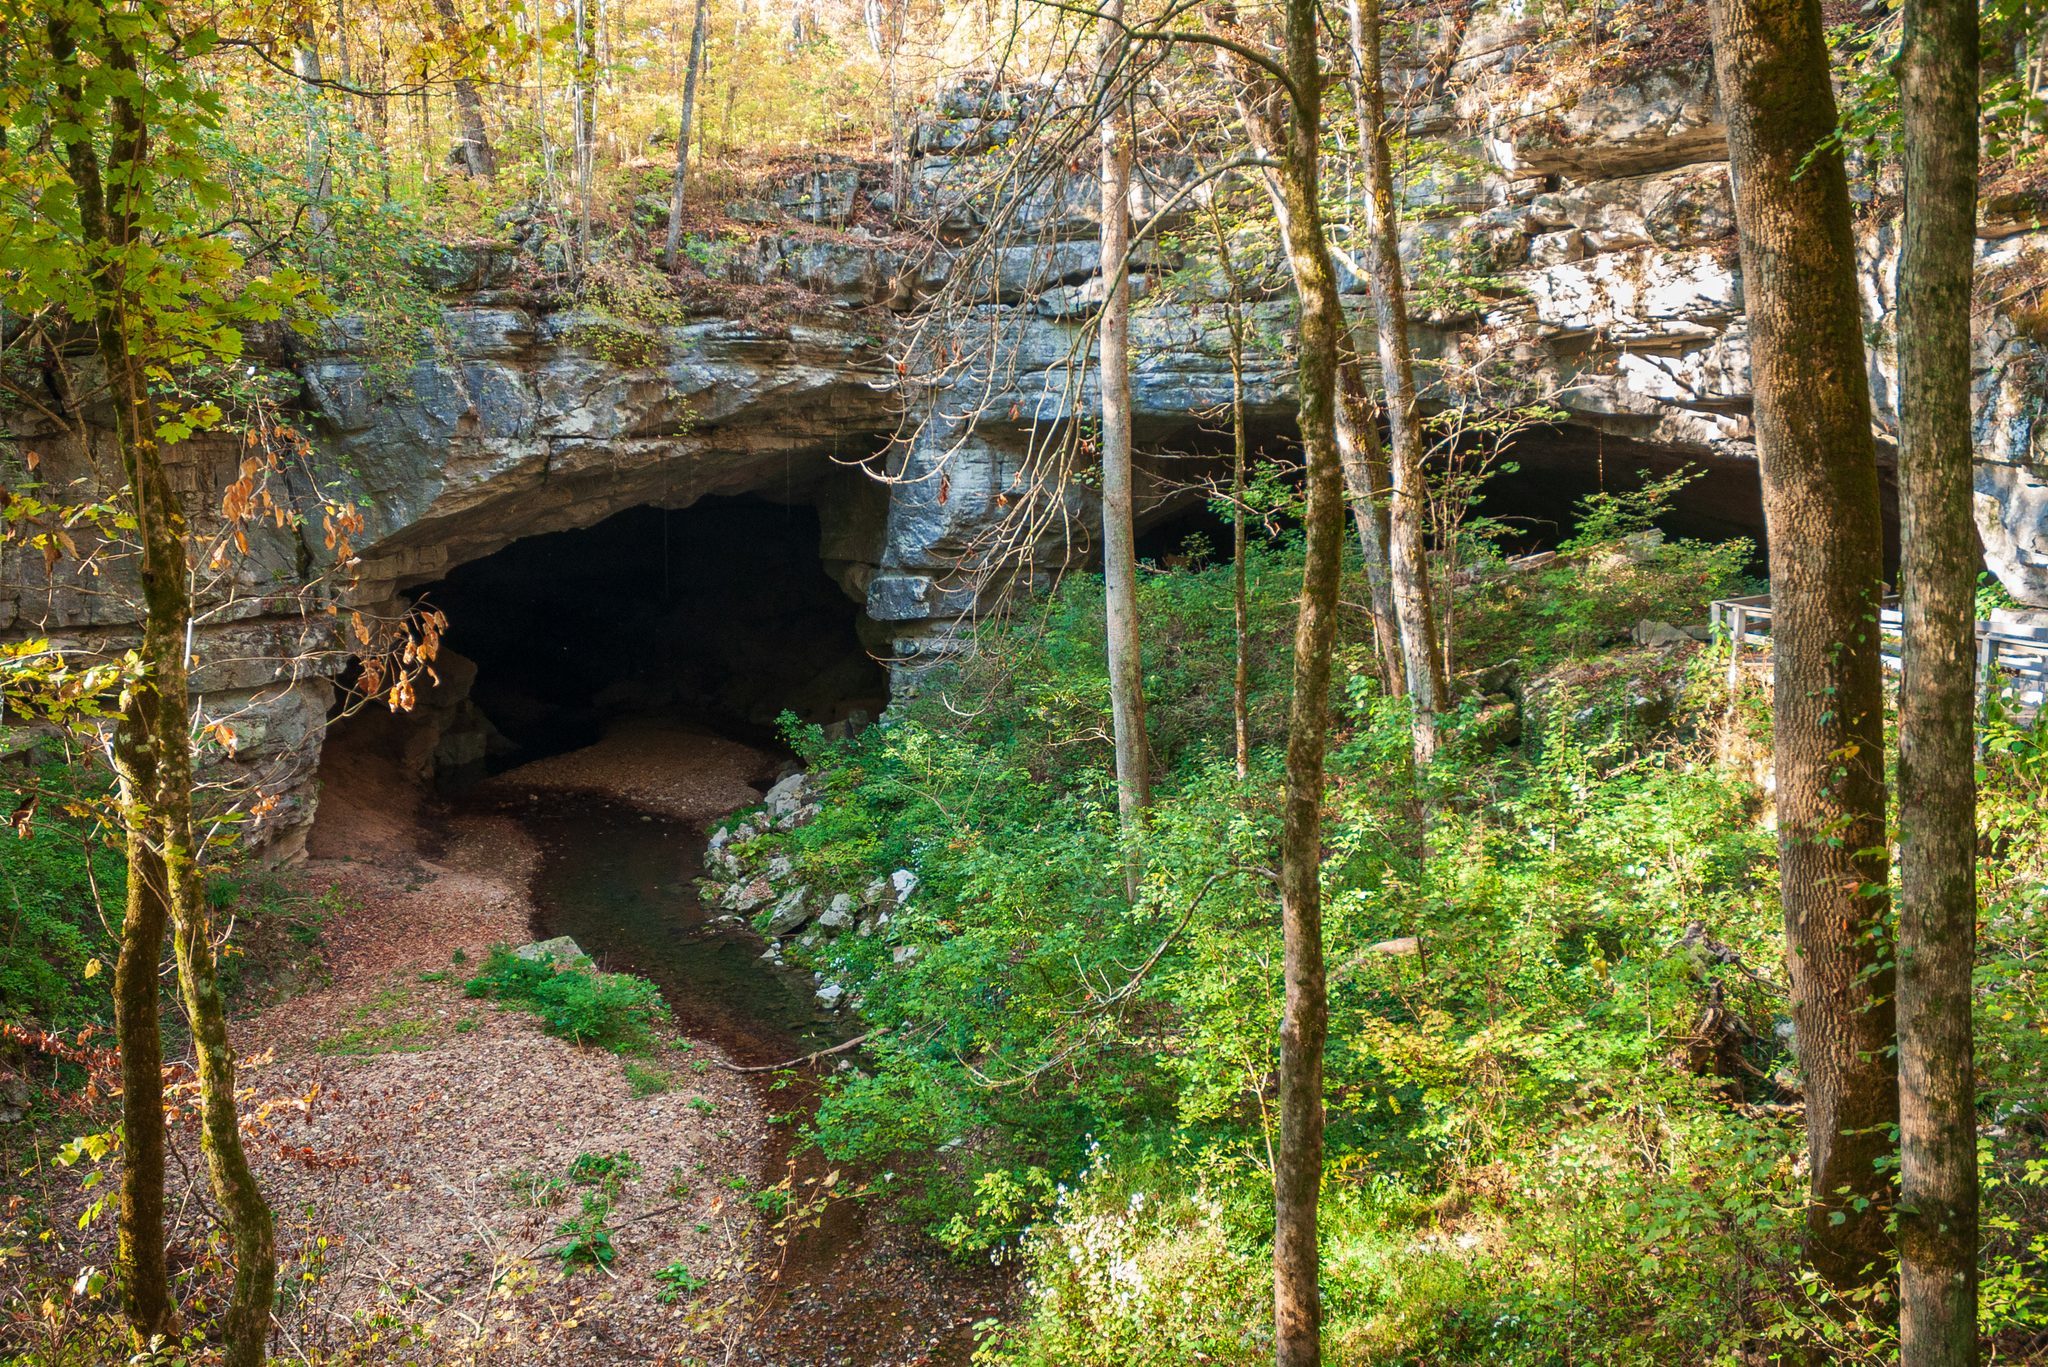 <p>This <a href="https://www.tripadvisor.com/Attraction_Review-g60948-d1453747-Reviews-Russell_Cave_National_Monument-Bridgeport_Alabama.html" rel="noopener">archeological site</a> sheltered prehistoric people thousands of years ago. The ballroom-size cavern is also one of the oldest sites of human habitation in North America, according to the National Park Service. Visitors can experience this hidden gem via boardwalk, and they can view a display of weapons and other tools found at the site in a small museum. It is open daily except for major winter holidays. Want to stay nearby? Learn the <a href="https://www.rd.com/article/best-day-to-book-hotel-room/" rel="noopener">best time to book a hotel</a> for great deals.</p> <p class="listicle-page__cta-button-shop"><a class="shop-btn" href="https://www.tripadvisor.com/Attraction_Review-g60948-d1453747-Reviews-Russell_Cave_National_Monument-Bridgeport_Alabama.html">Learn More</a></p>